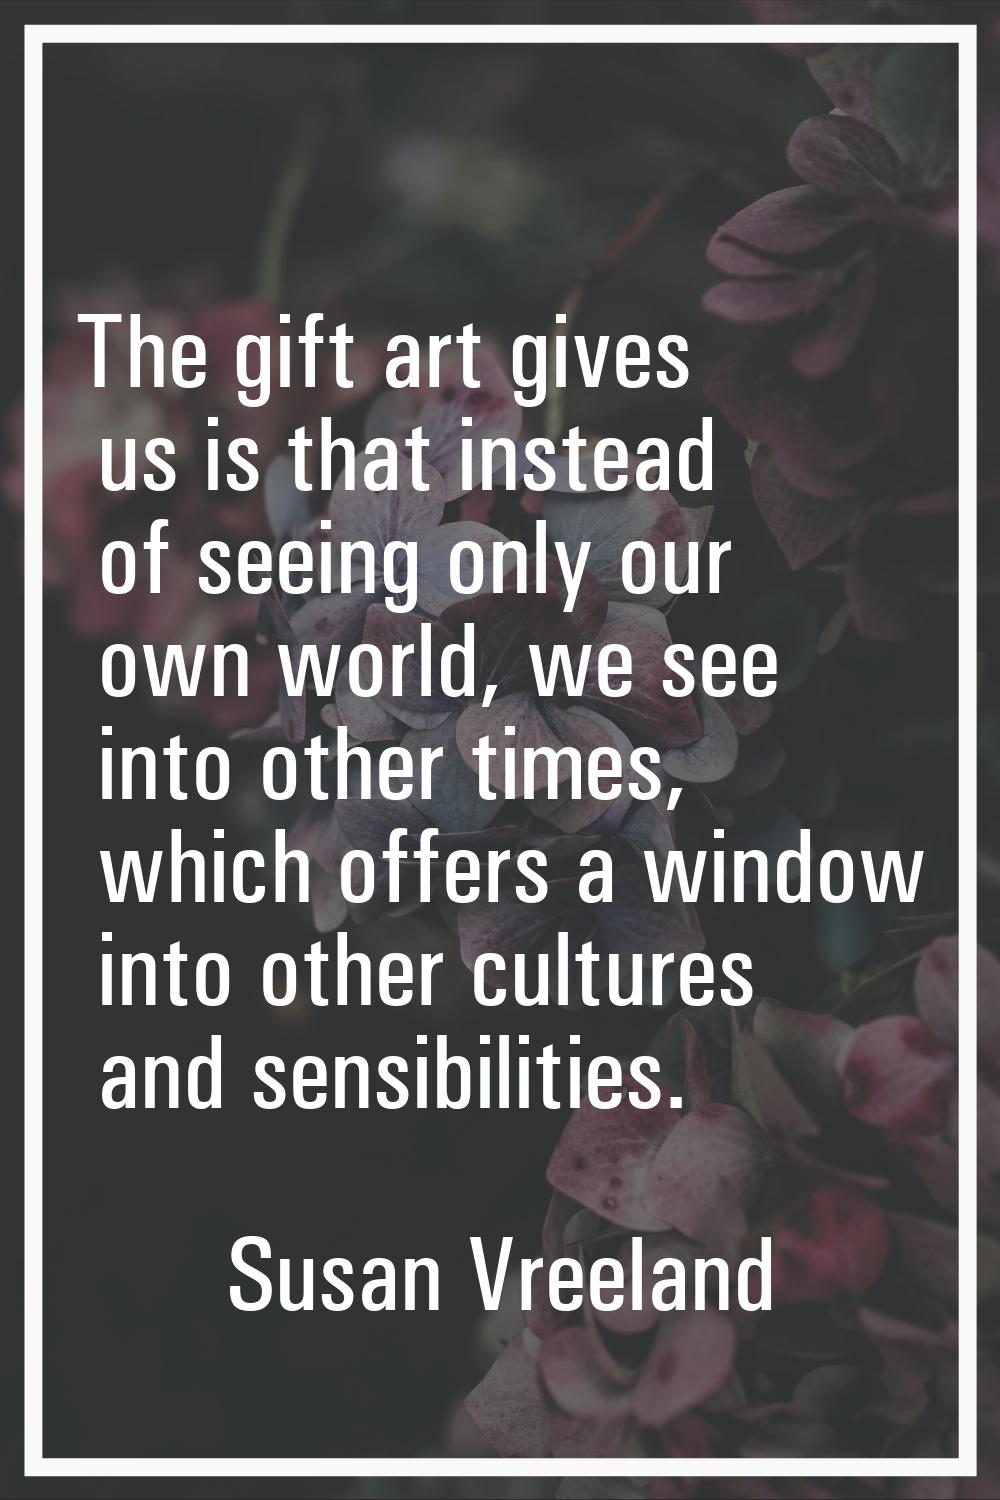 The gift art gives us is that instead of seeing only our own world, we see into other times, which 